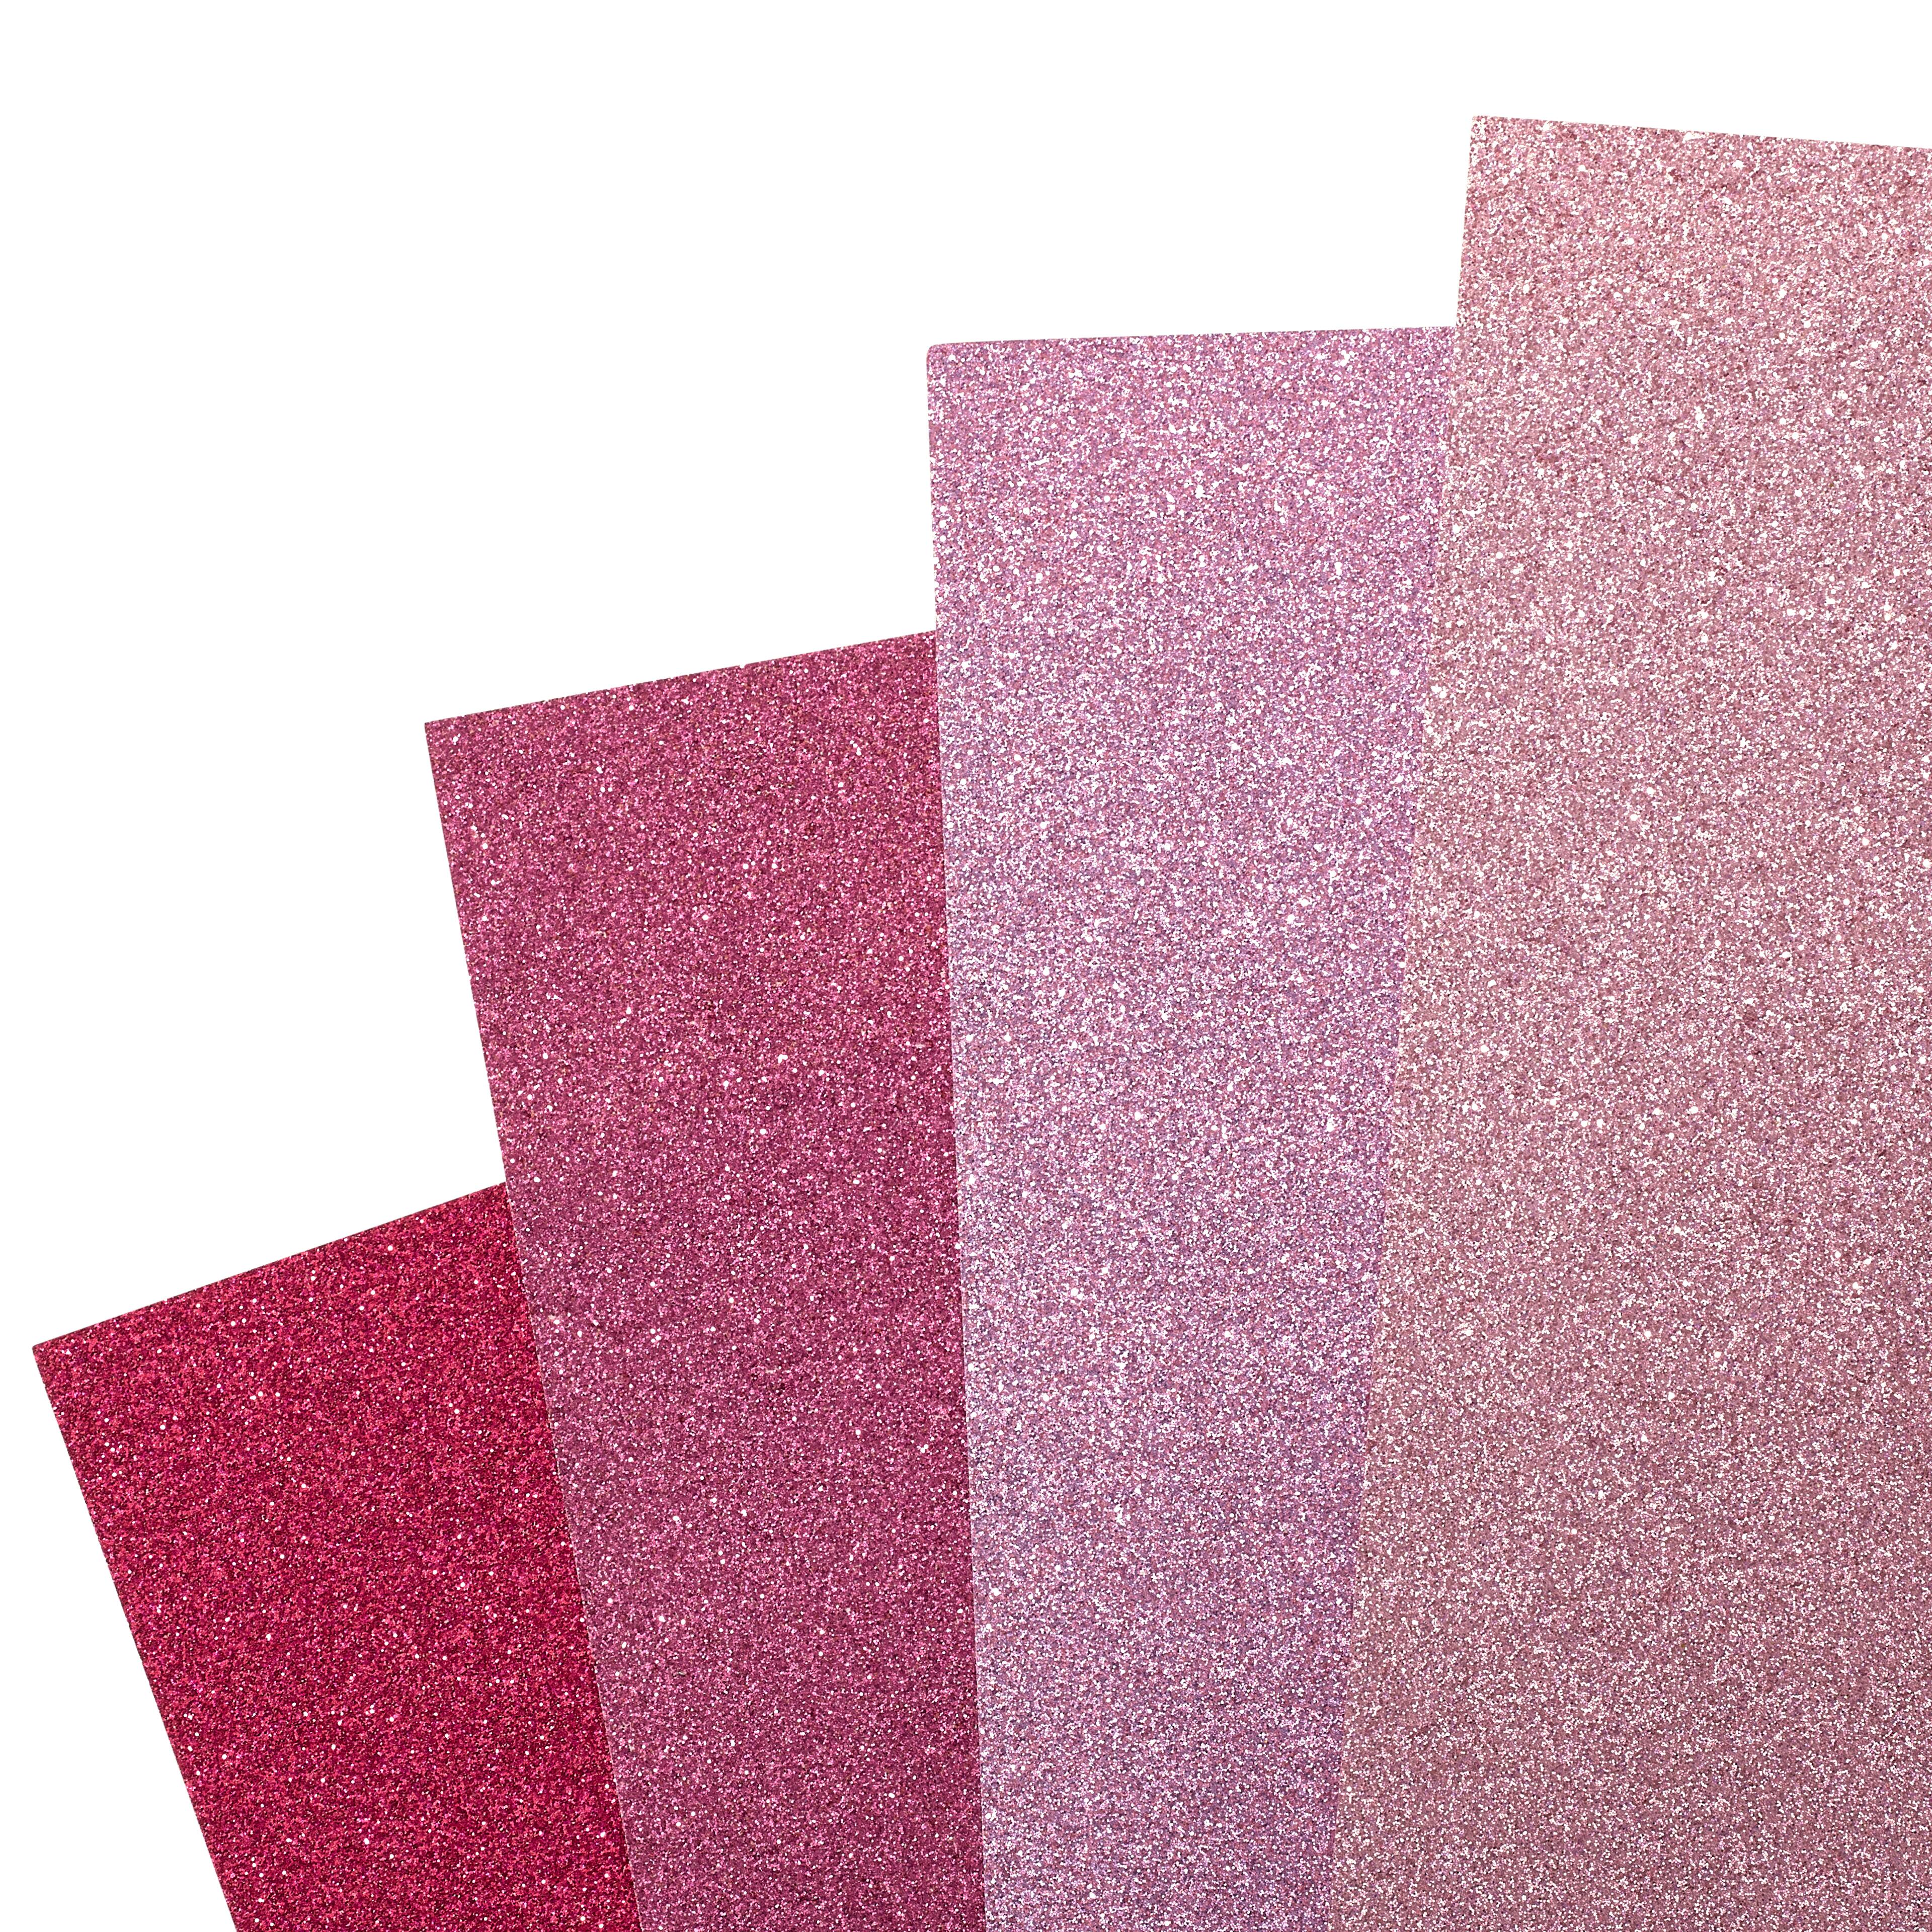 SPRING GLITTER ~12X12 SCRAPBOOK CARDSTOCK PAPER PAD 24 LOT~RECOLLECTIONS~